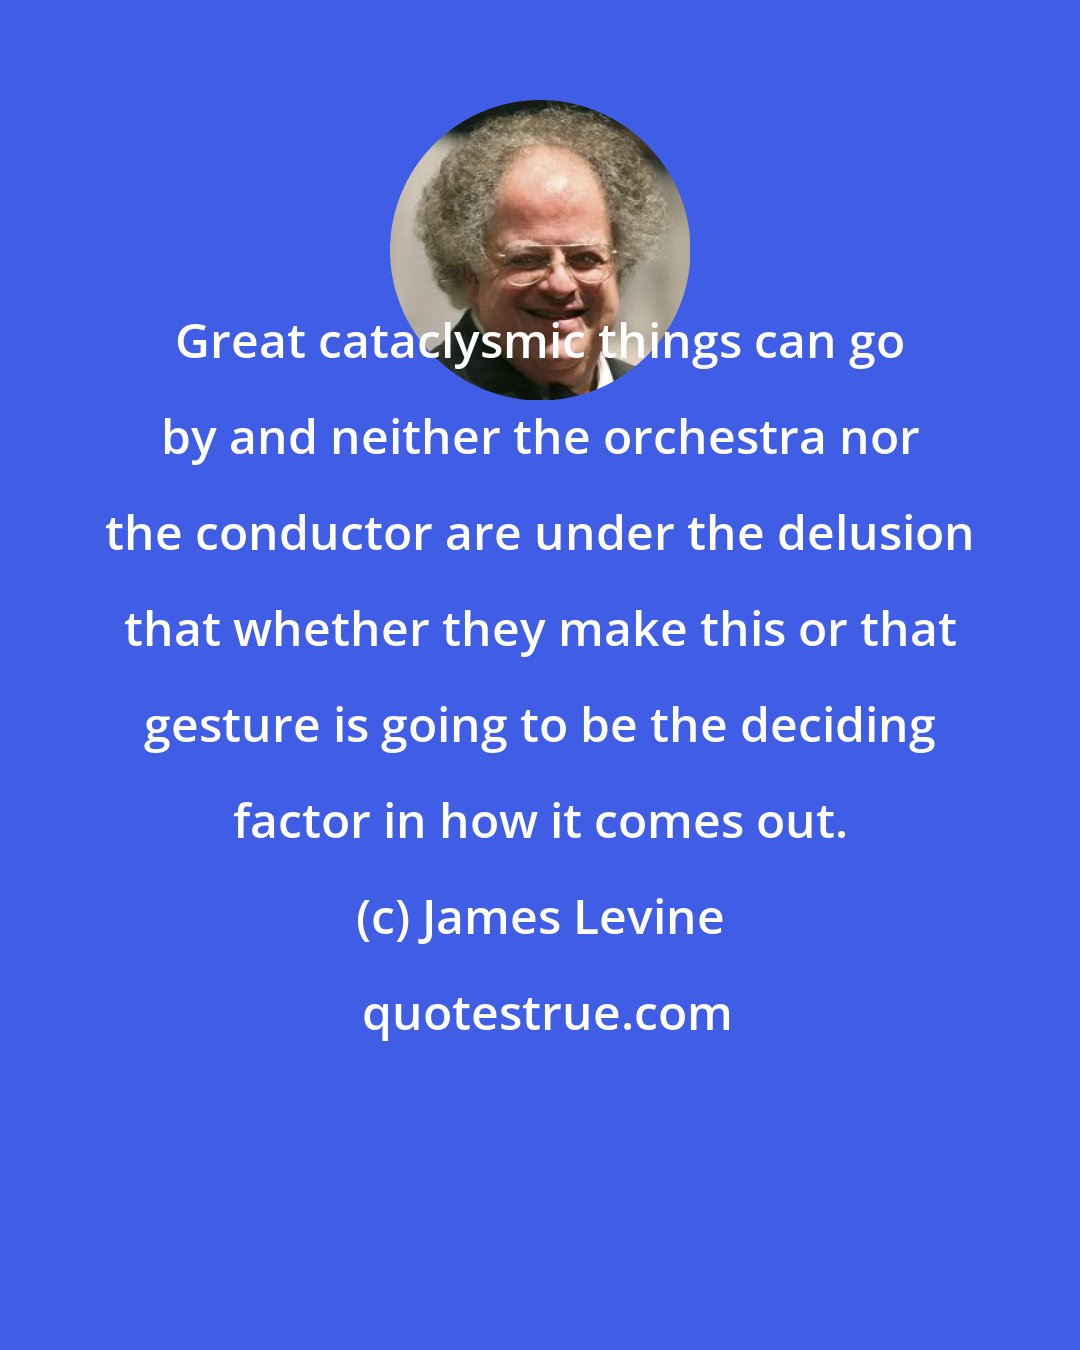 James Levine: Great cataclysmic things can go by and neither the orchestra nor the conductor are under the delusion that whether they make this or that gesture is going to be the deciding factor in how it comes out.